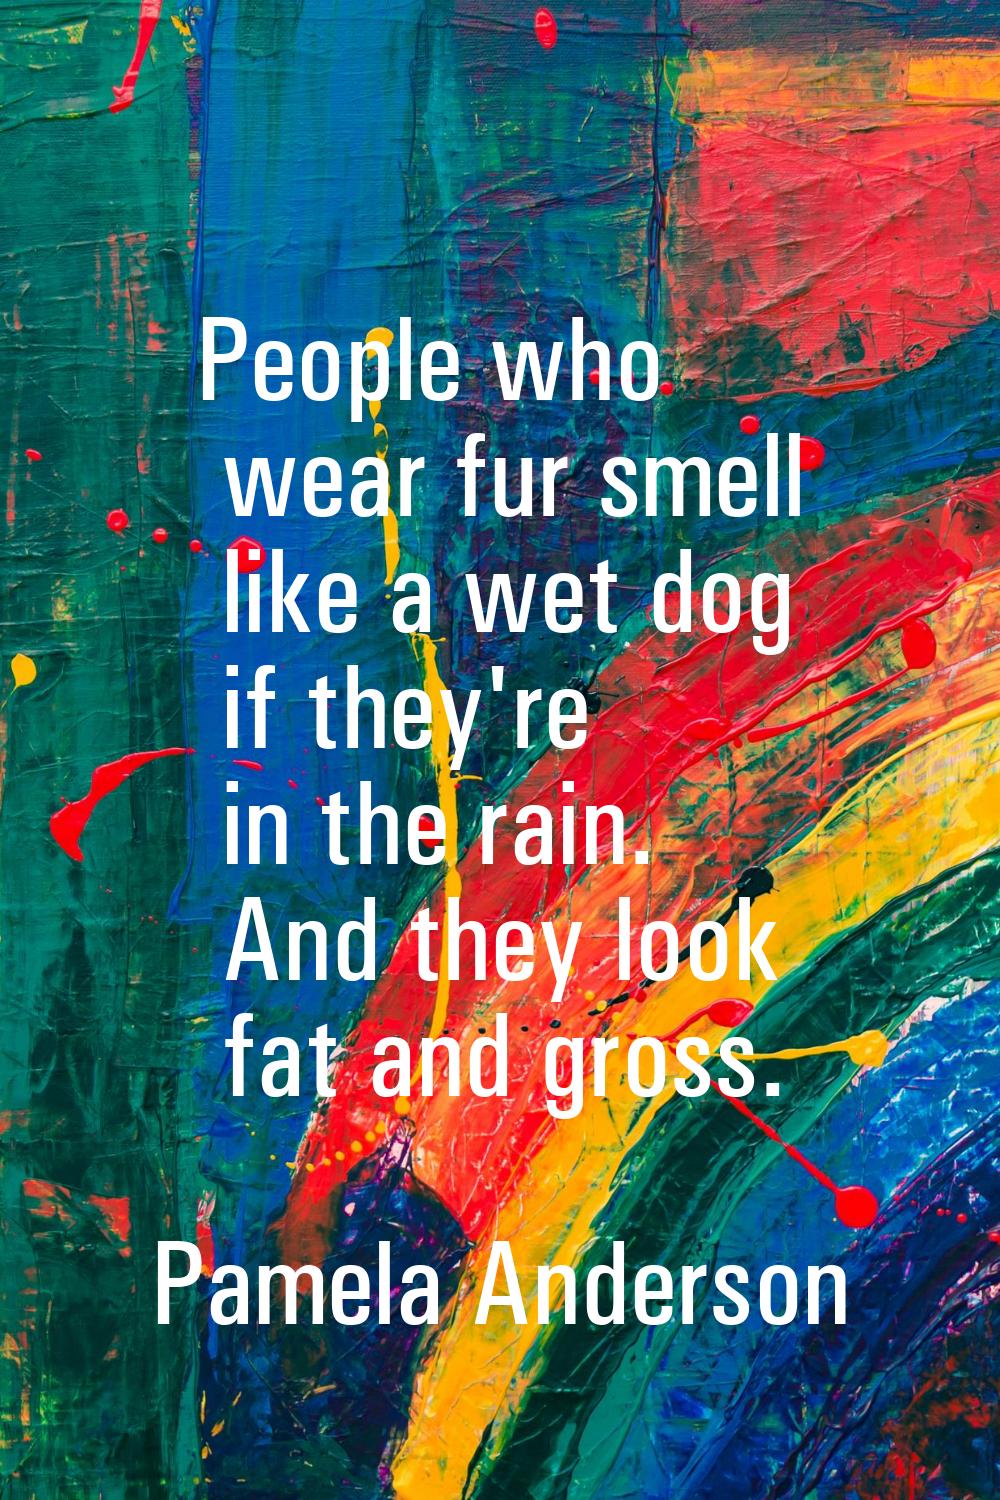 People who wear fur smell like a wet dog if they're in the rain. And they look fat and gross.